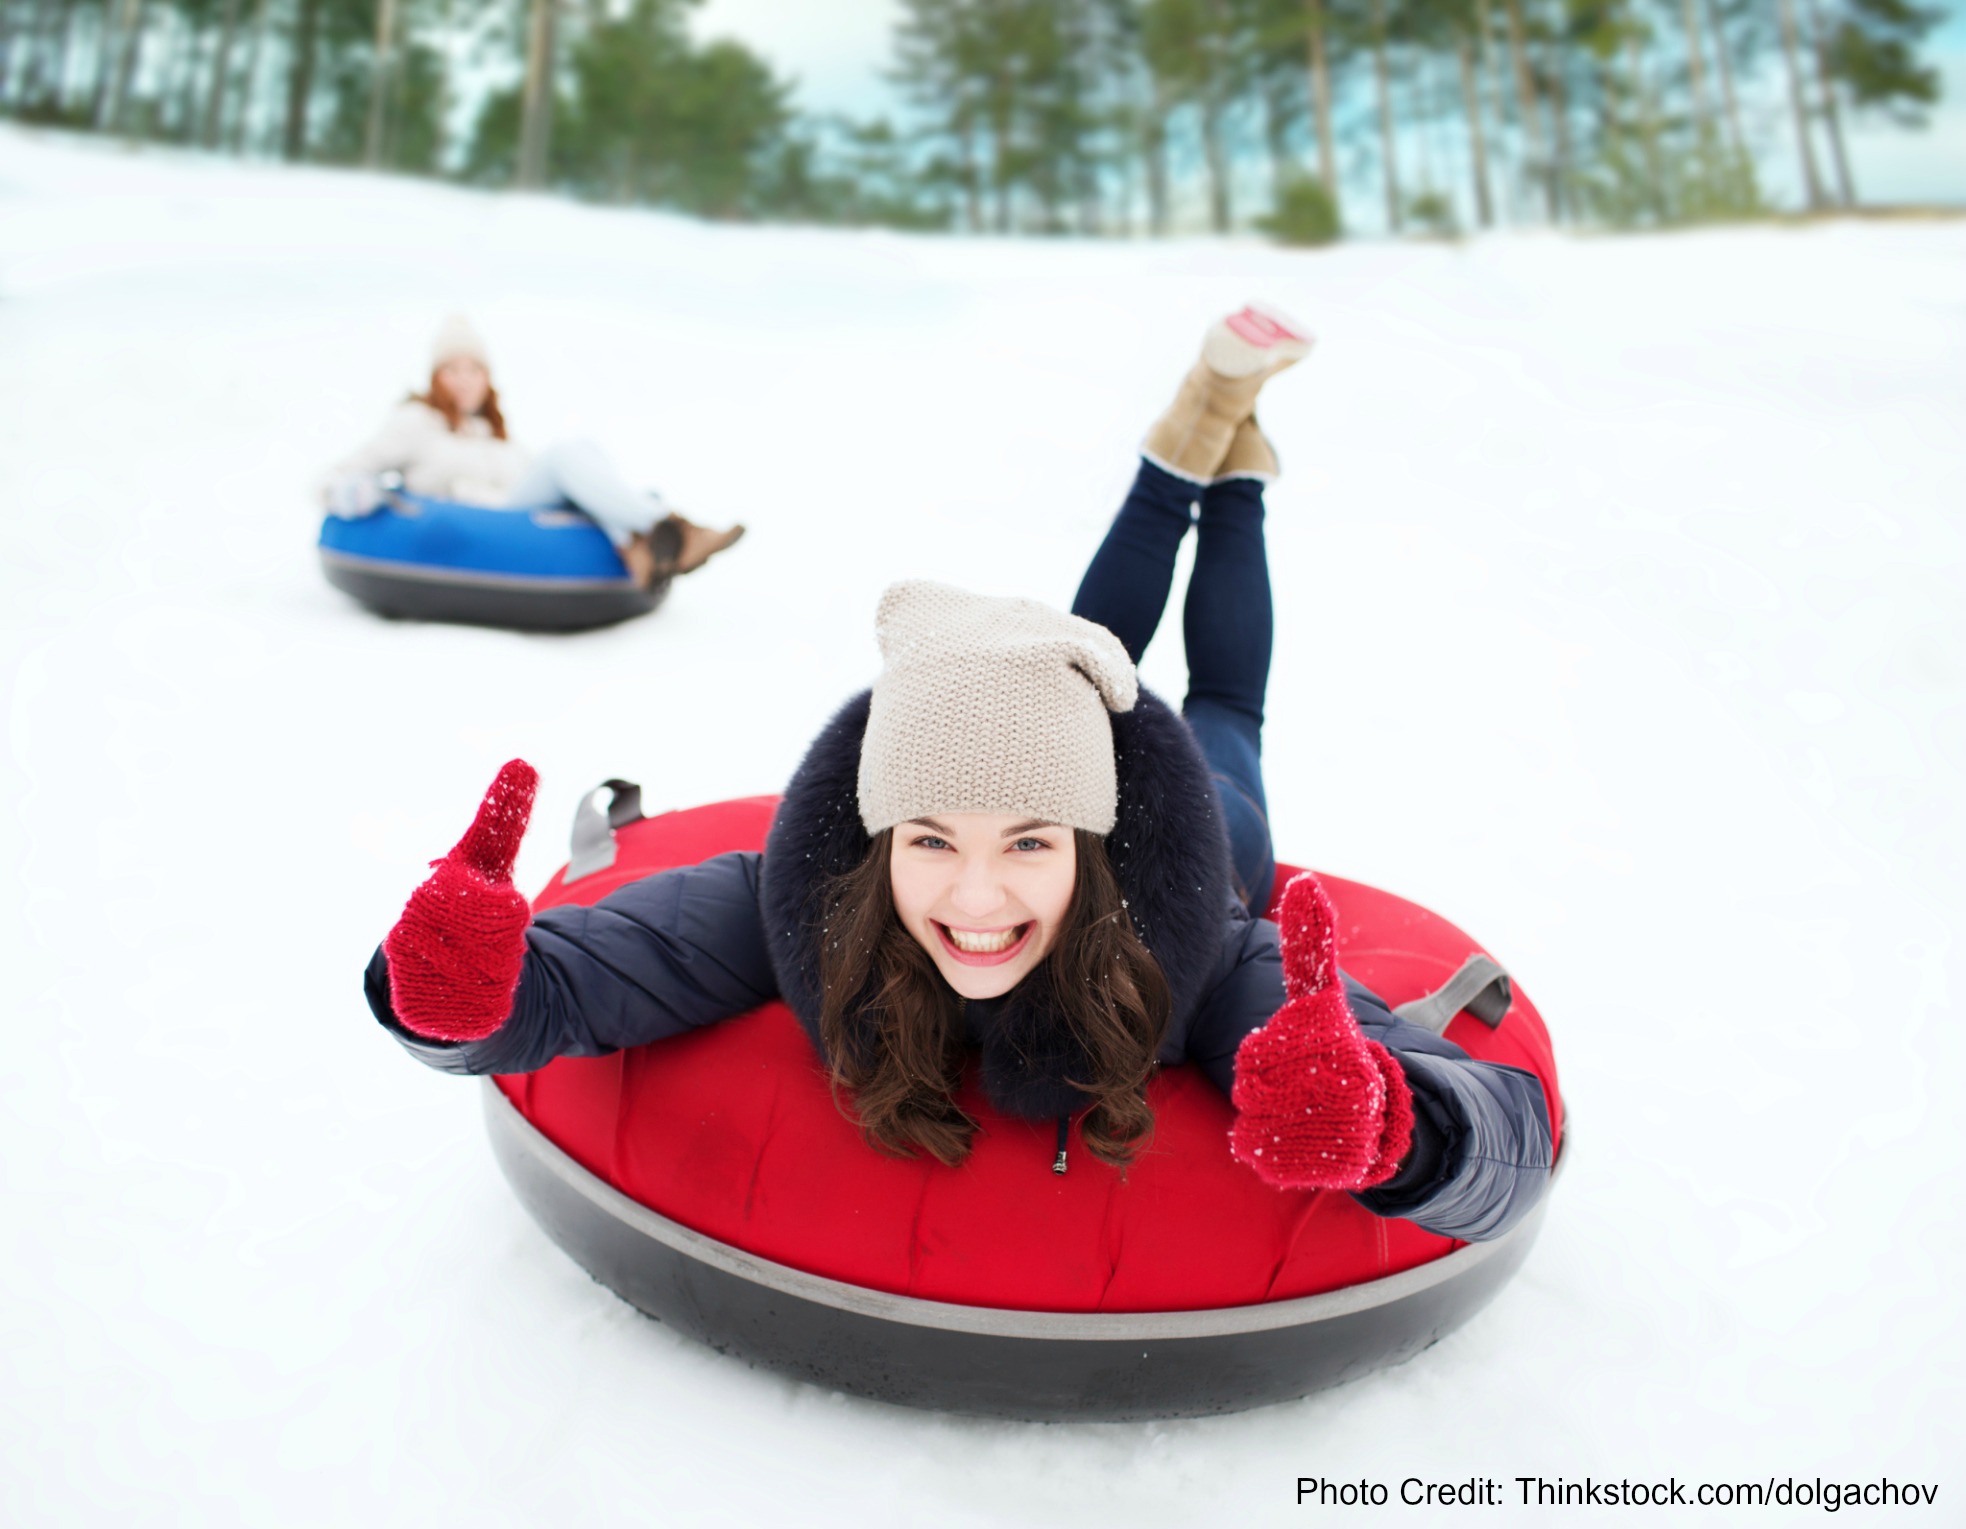 There's nothing like snowtubing in the Poconos in PA!